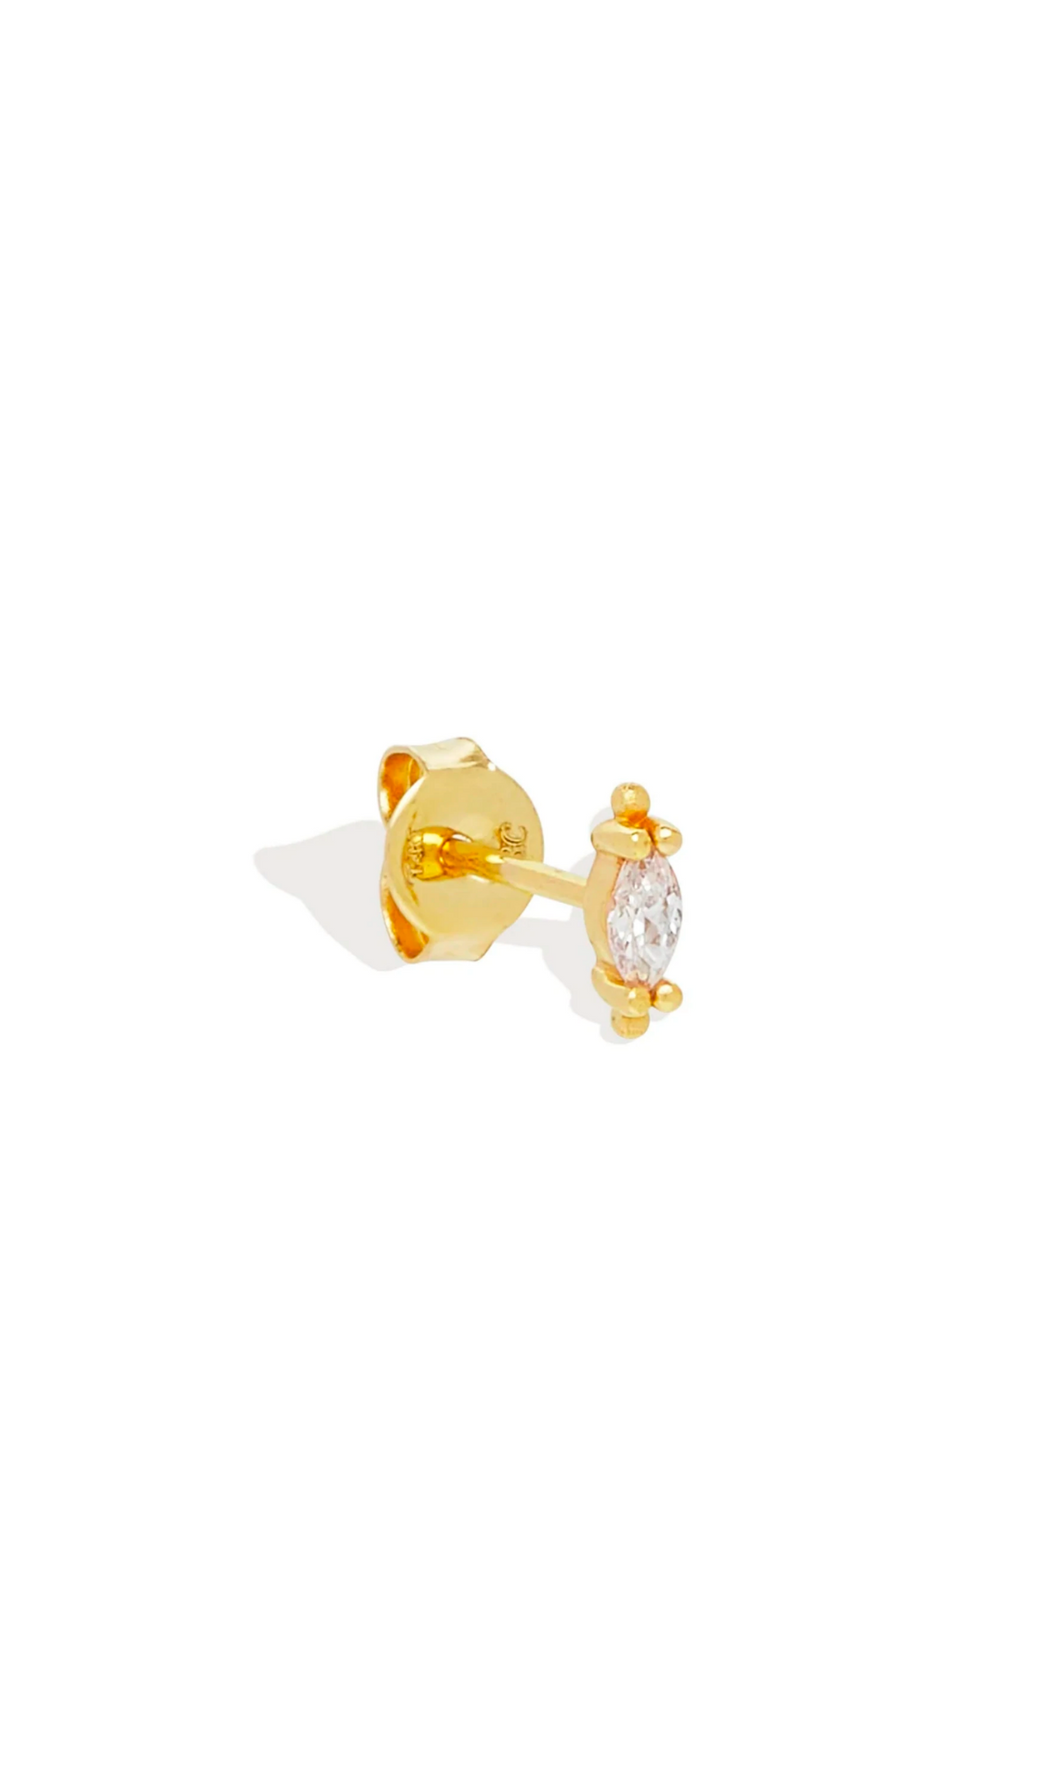 BY CHARLOTTE | Radiance Crystal Stud Earring